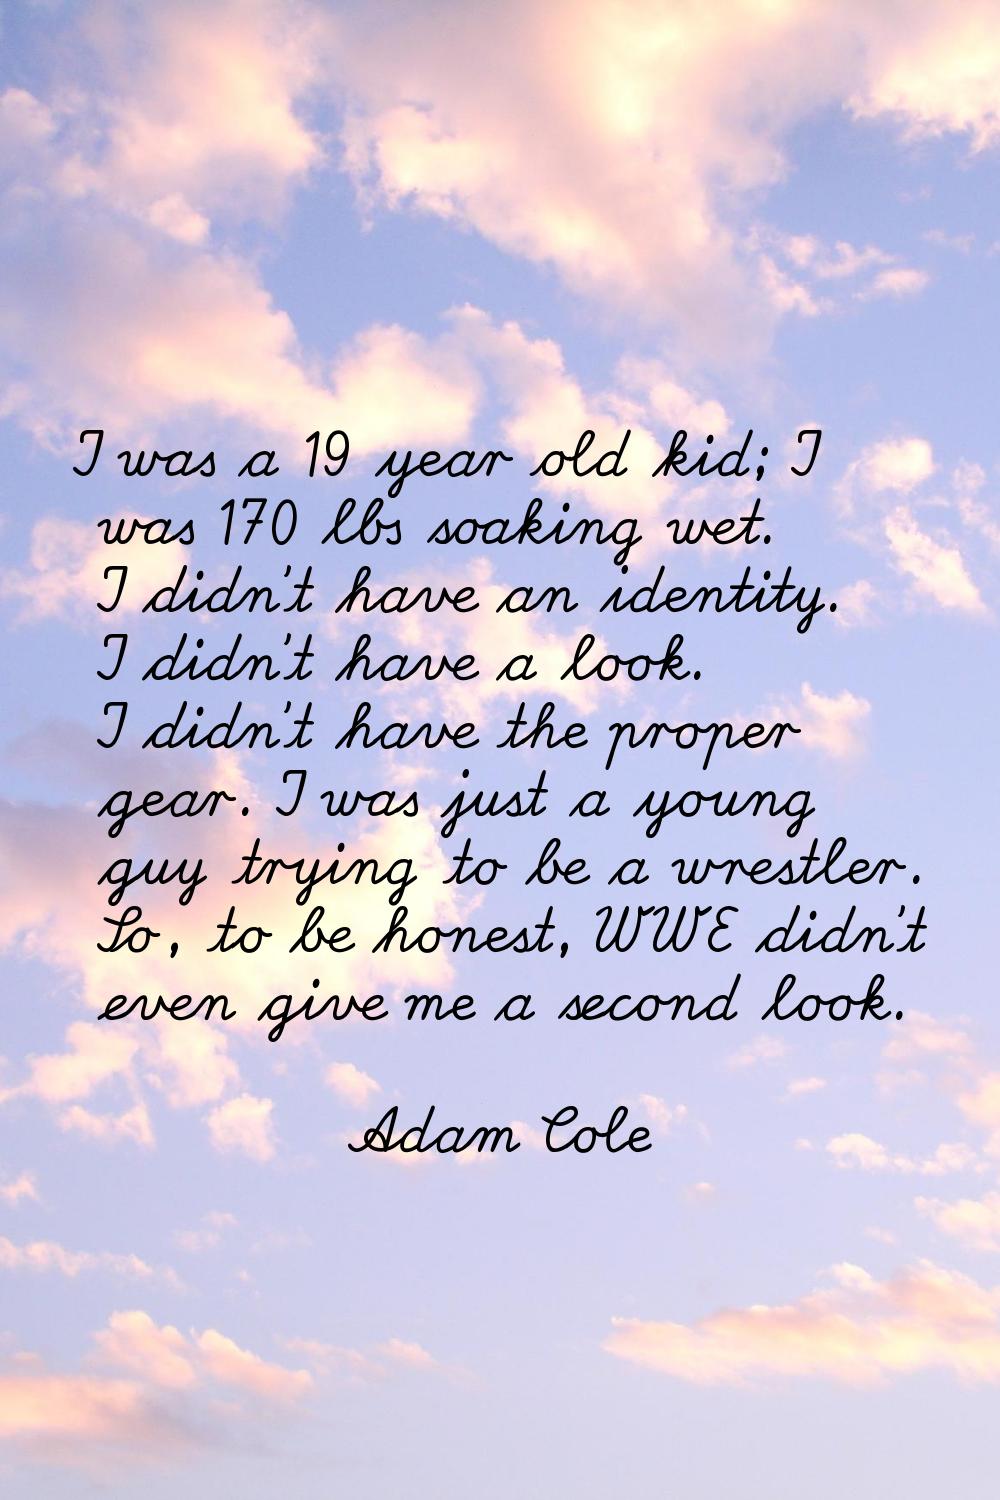 I was a 19 year old kid; I was 170 lbs soaking wet. I didn't have an identity. I didn't have a look